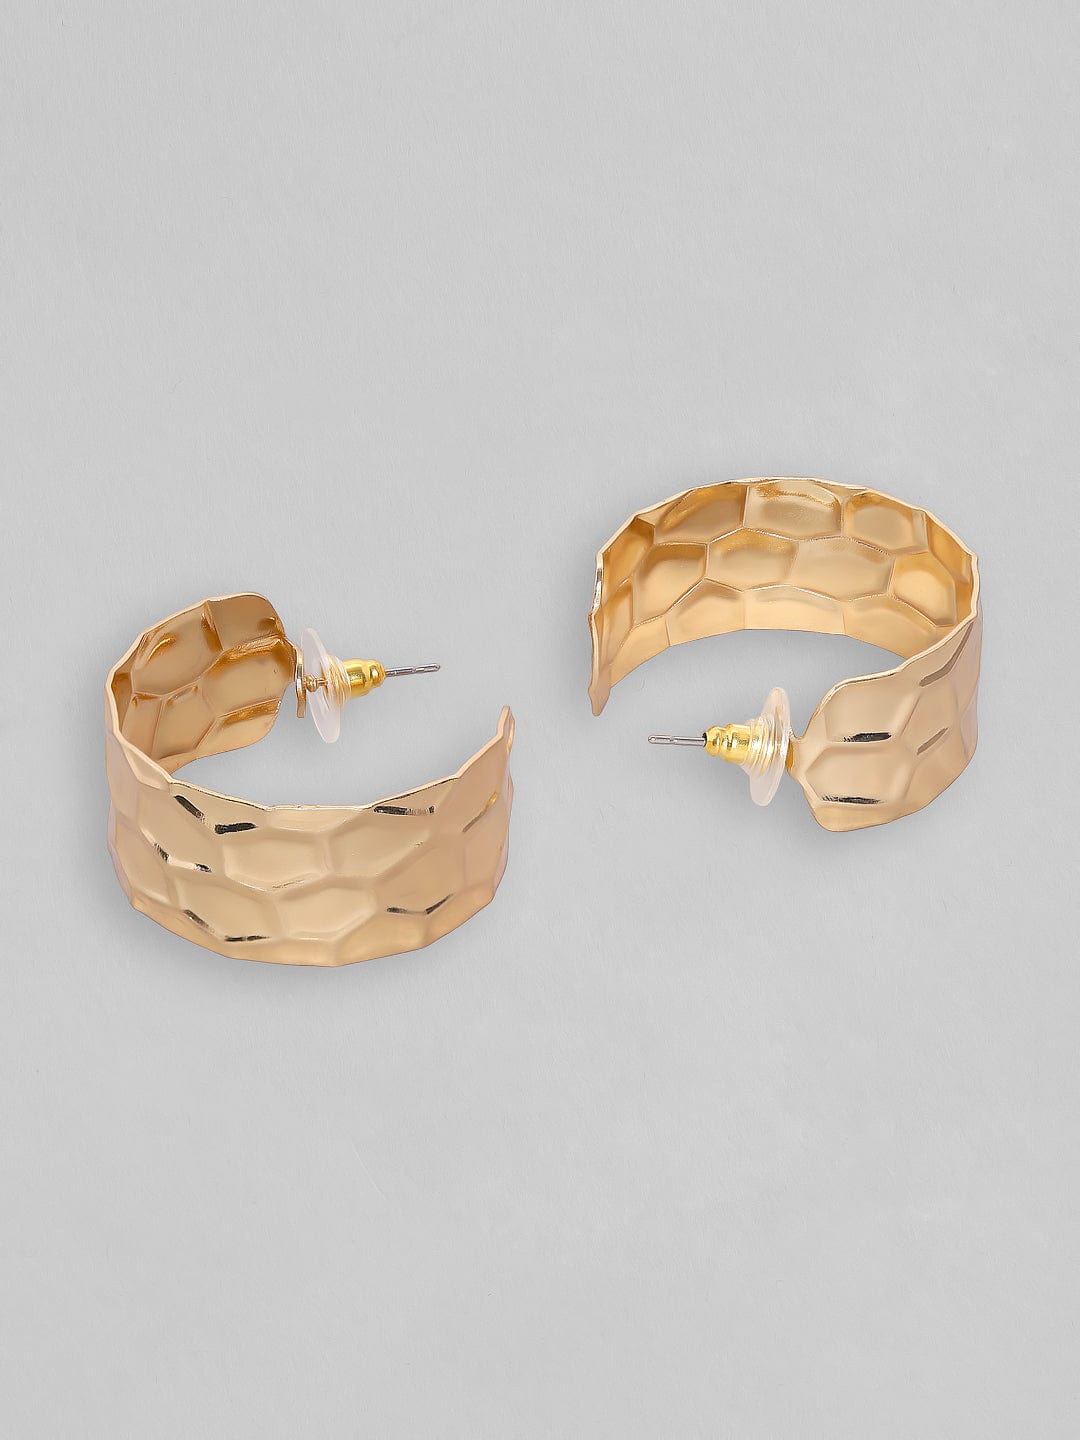 Rubans Voguish Gold-Toned Contemporary Textured Hoop Earrings Earrings